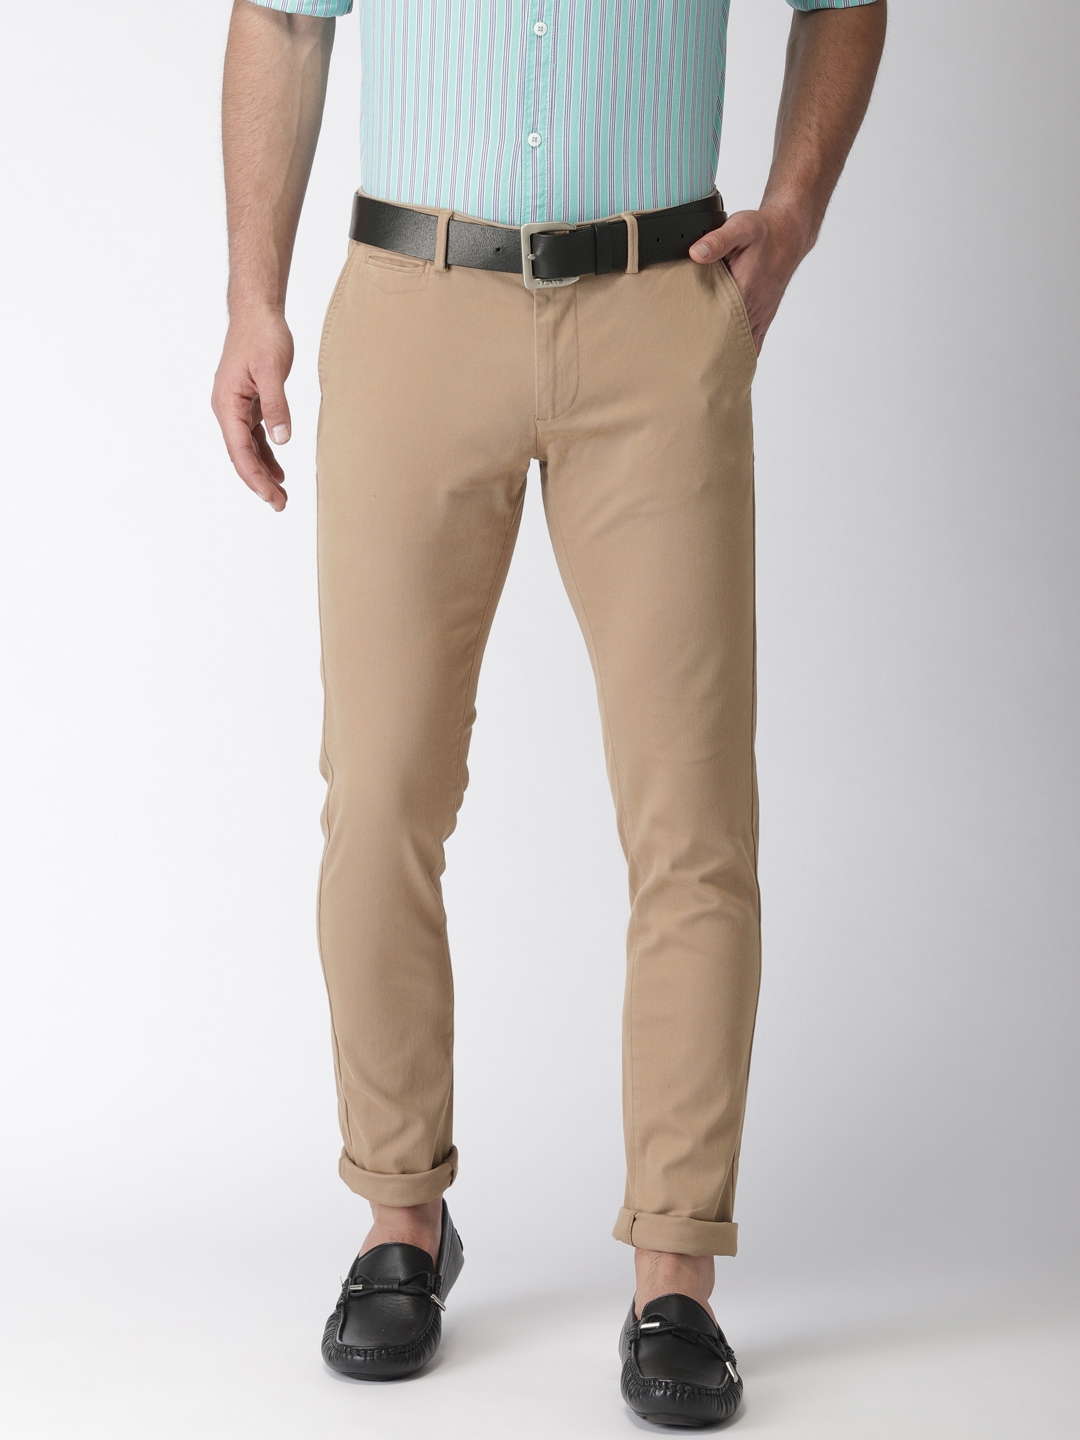 Buy Pista Green Trousers  Pants for Men by The Indian Garage Co Online   Ajiocom